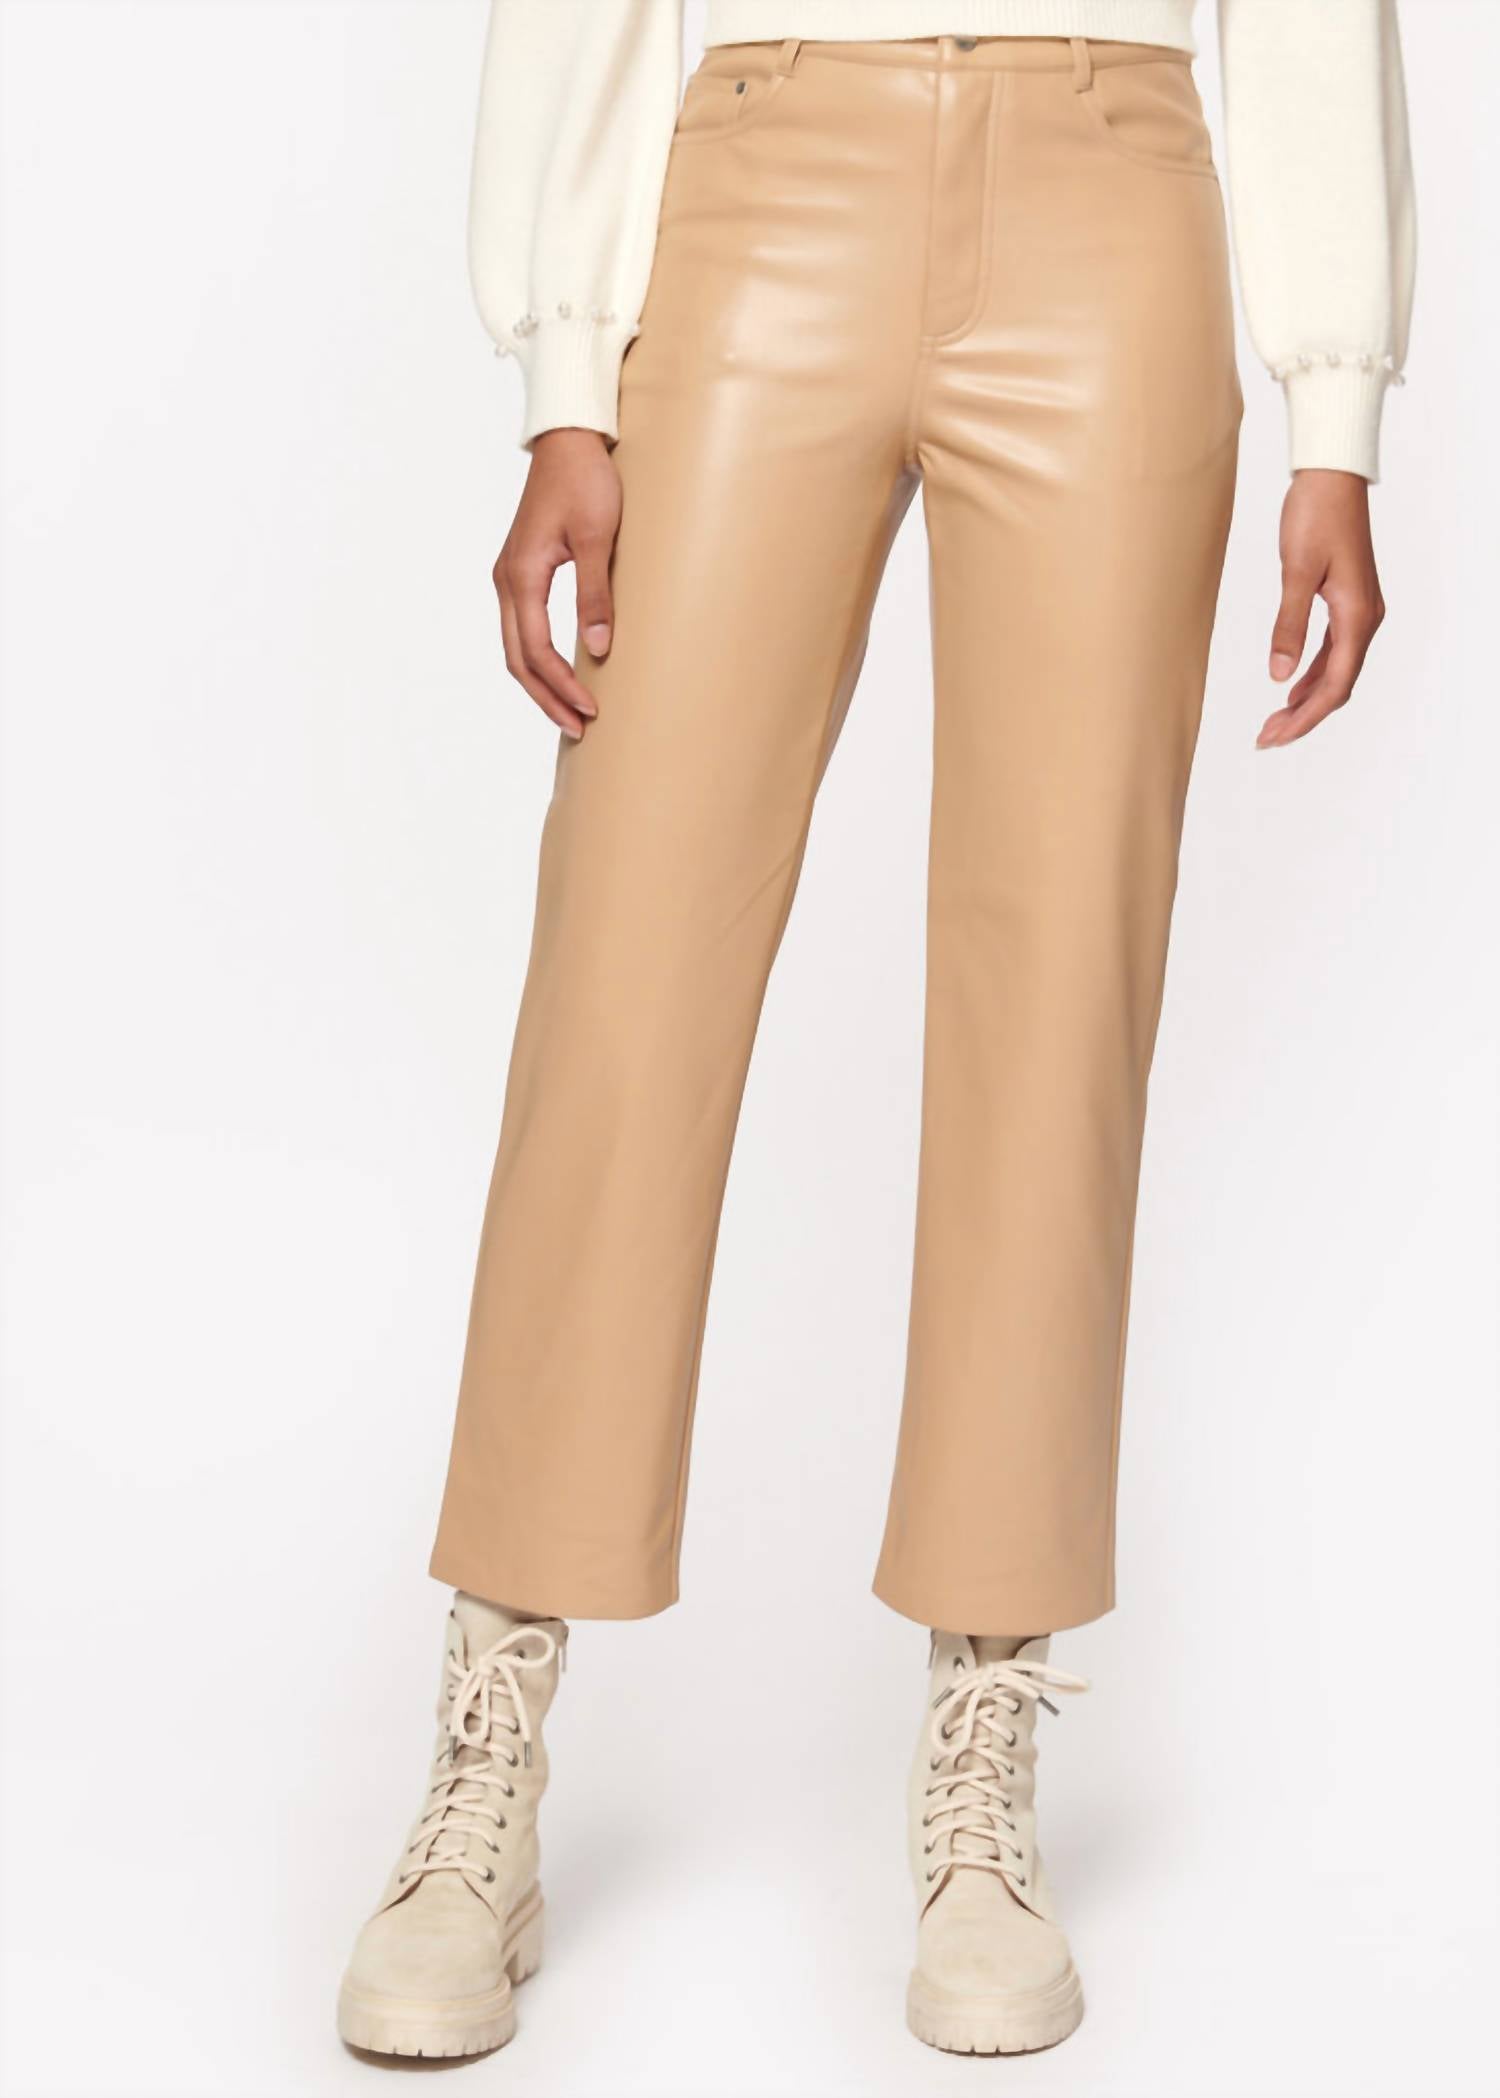 CAMI NYC Hanie Vegan Leather Pant in Soy